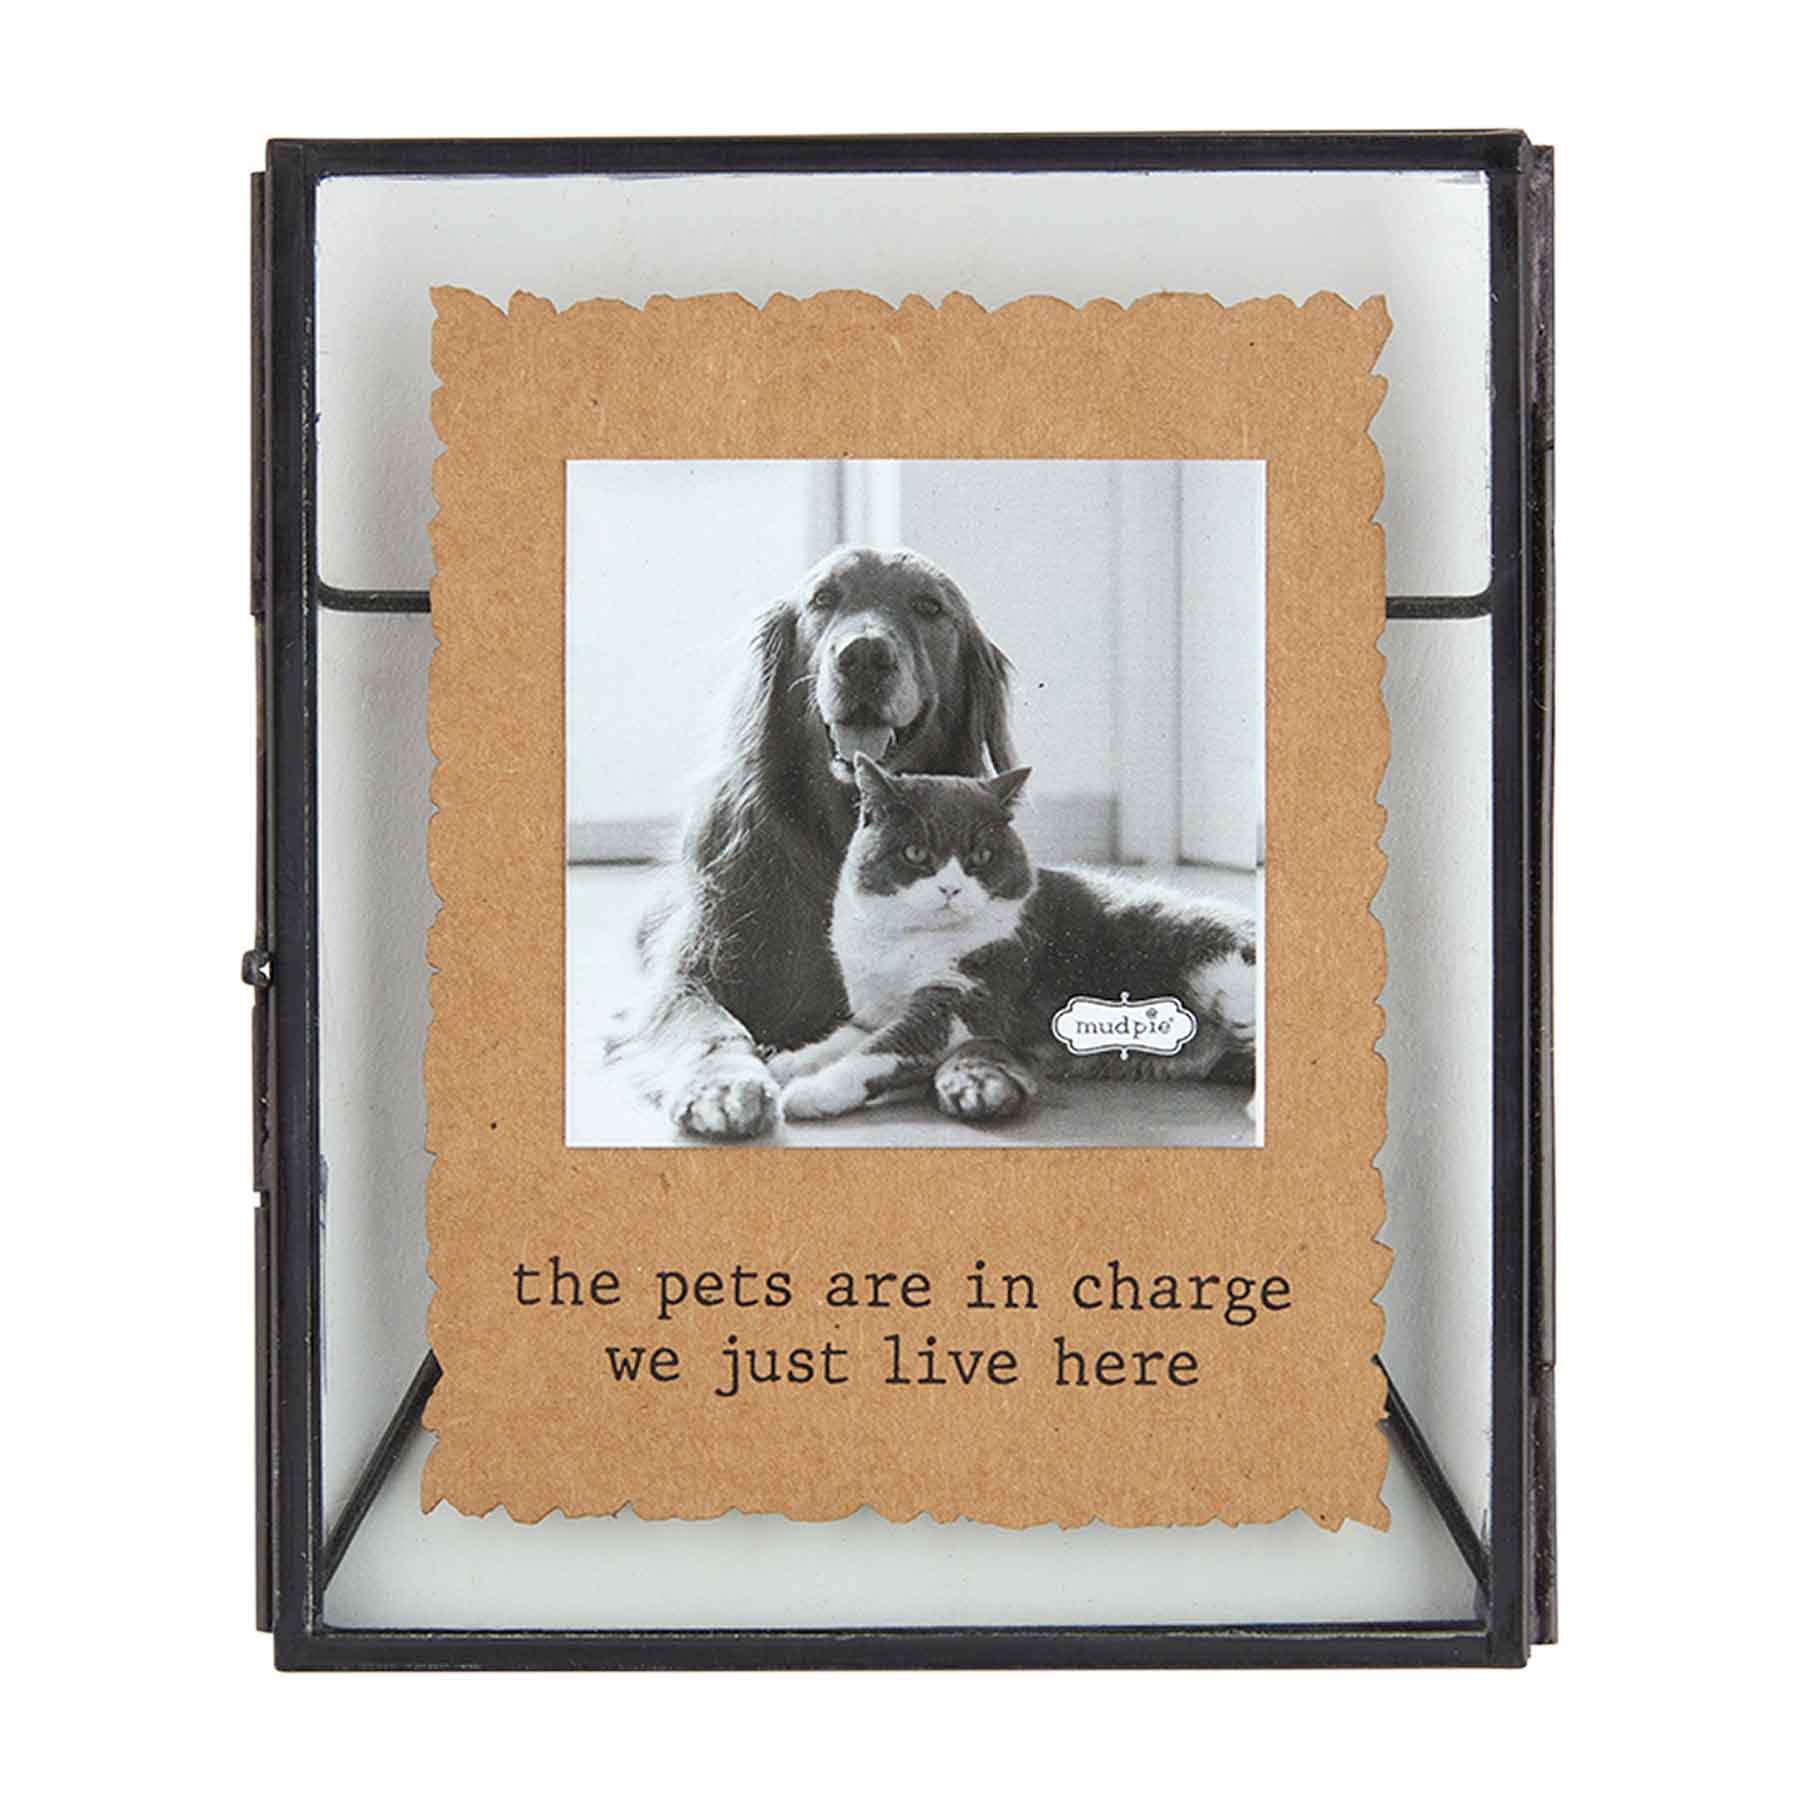 Mudpie PET IN CHARGE GLASS PET FRAME